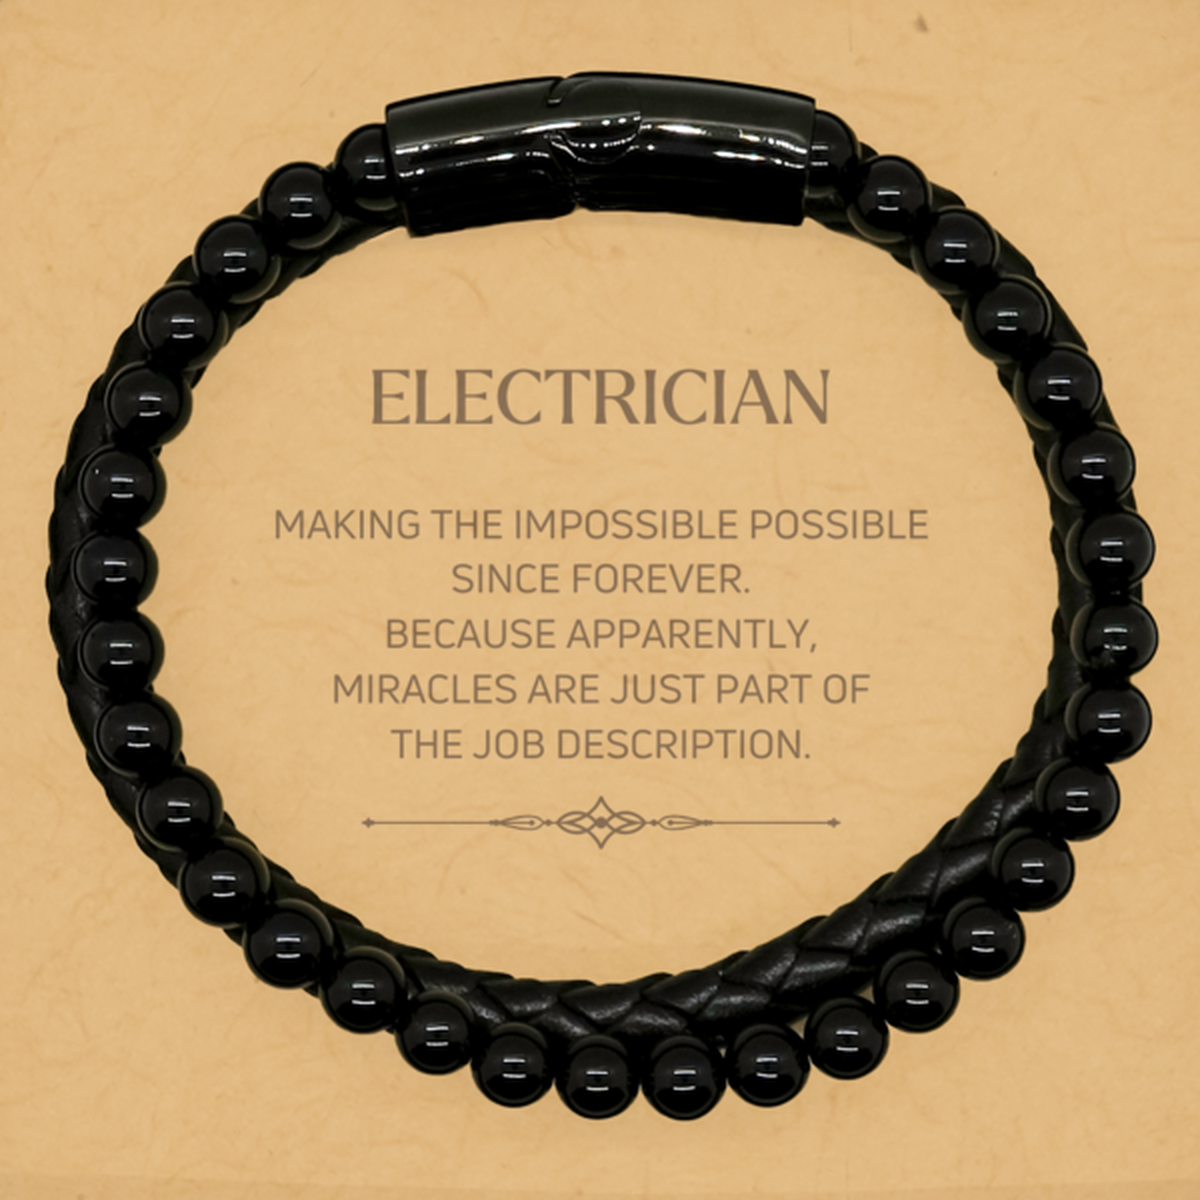 Funny Electrician Gifts, Miracles are just part of the job description, Inspirational Birthday Stone Leather Bracelets For Electrician, Men, Women, Coworkers, Friends, Boss